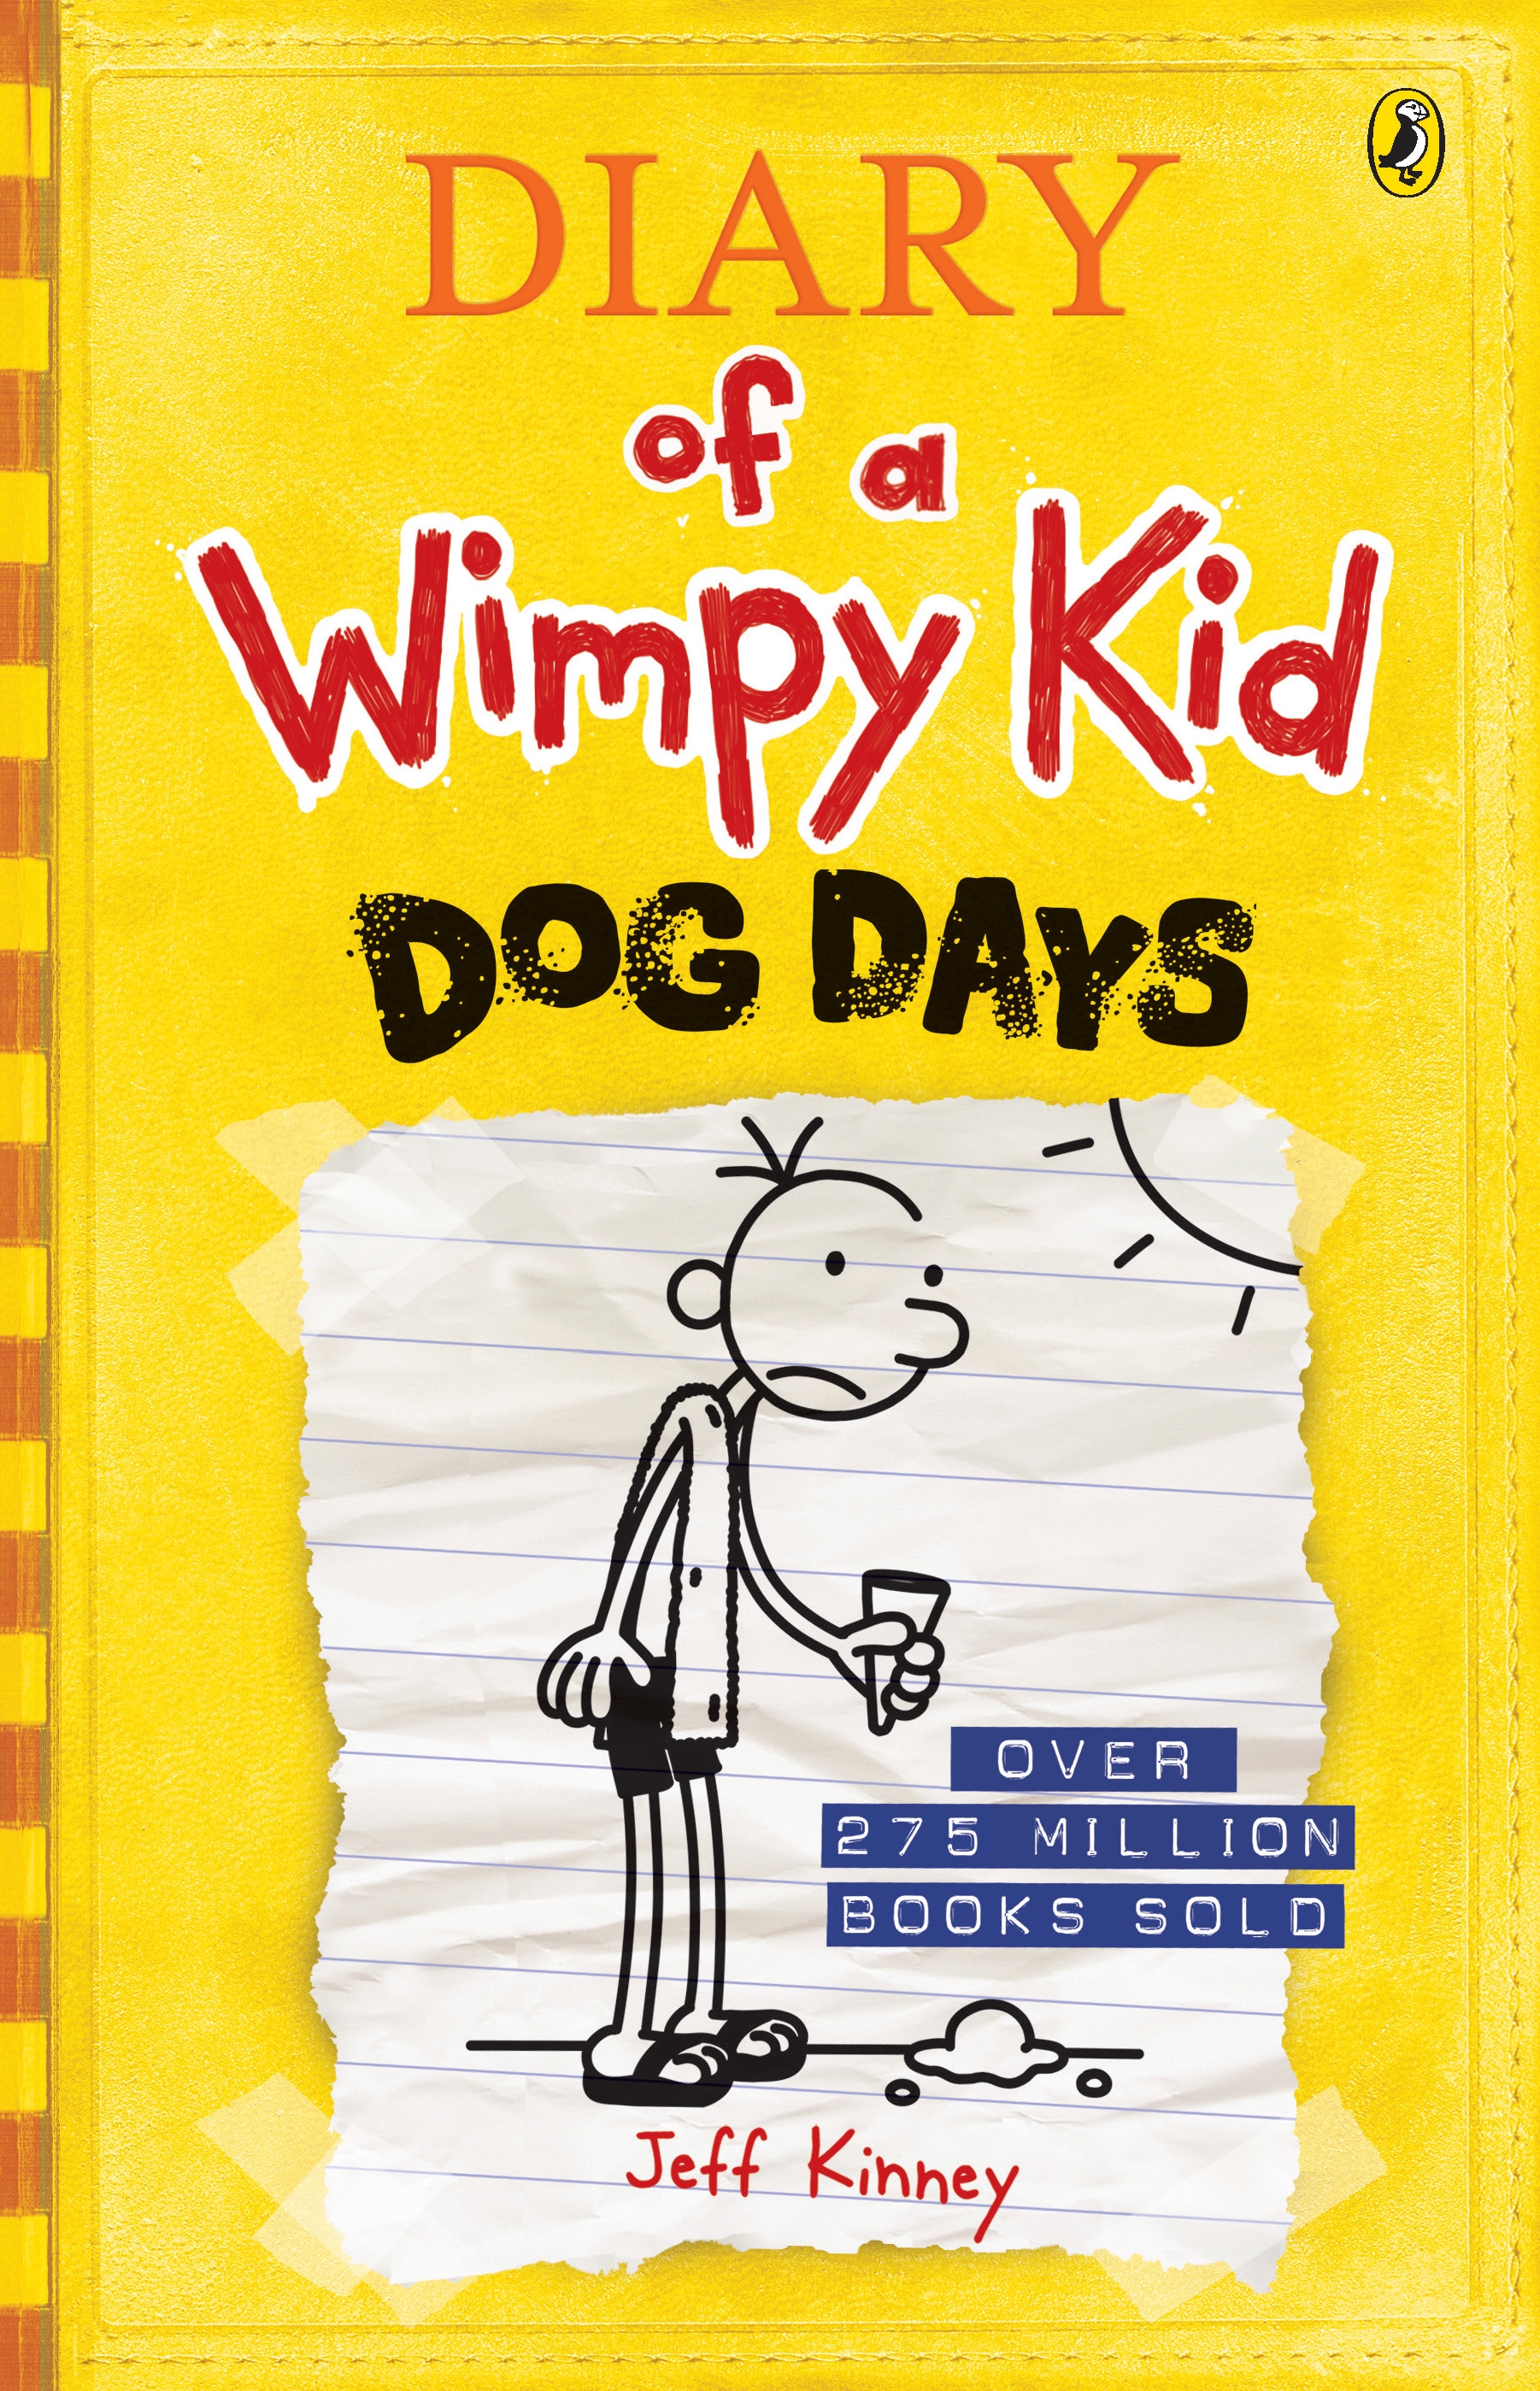 Diary of a Wimpy Kid: Dog Days (Book 4) by Jeff Kinney - Penguin